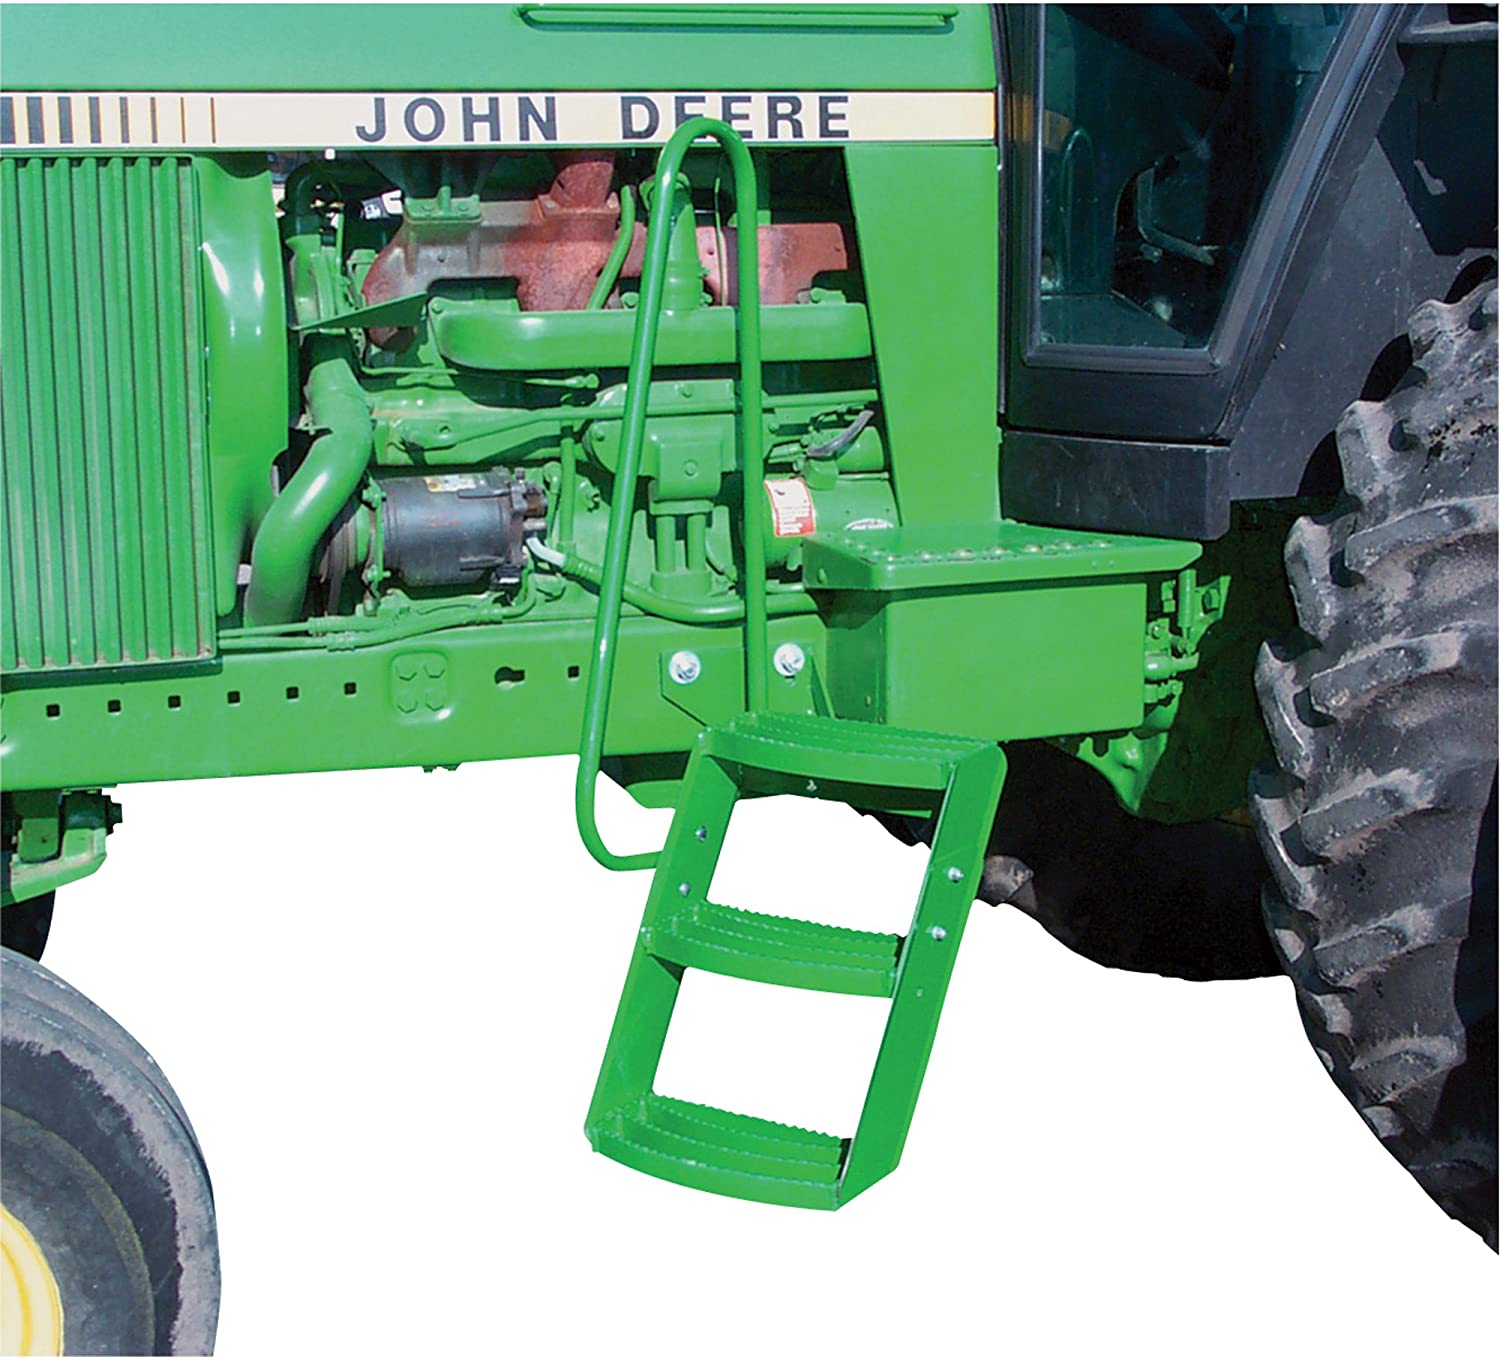 Added Steps Handrails John Deere Tractor Product Disability Work